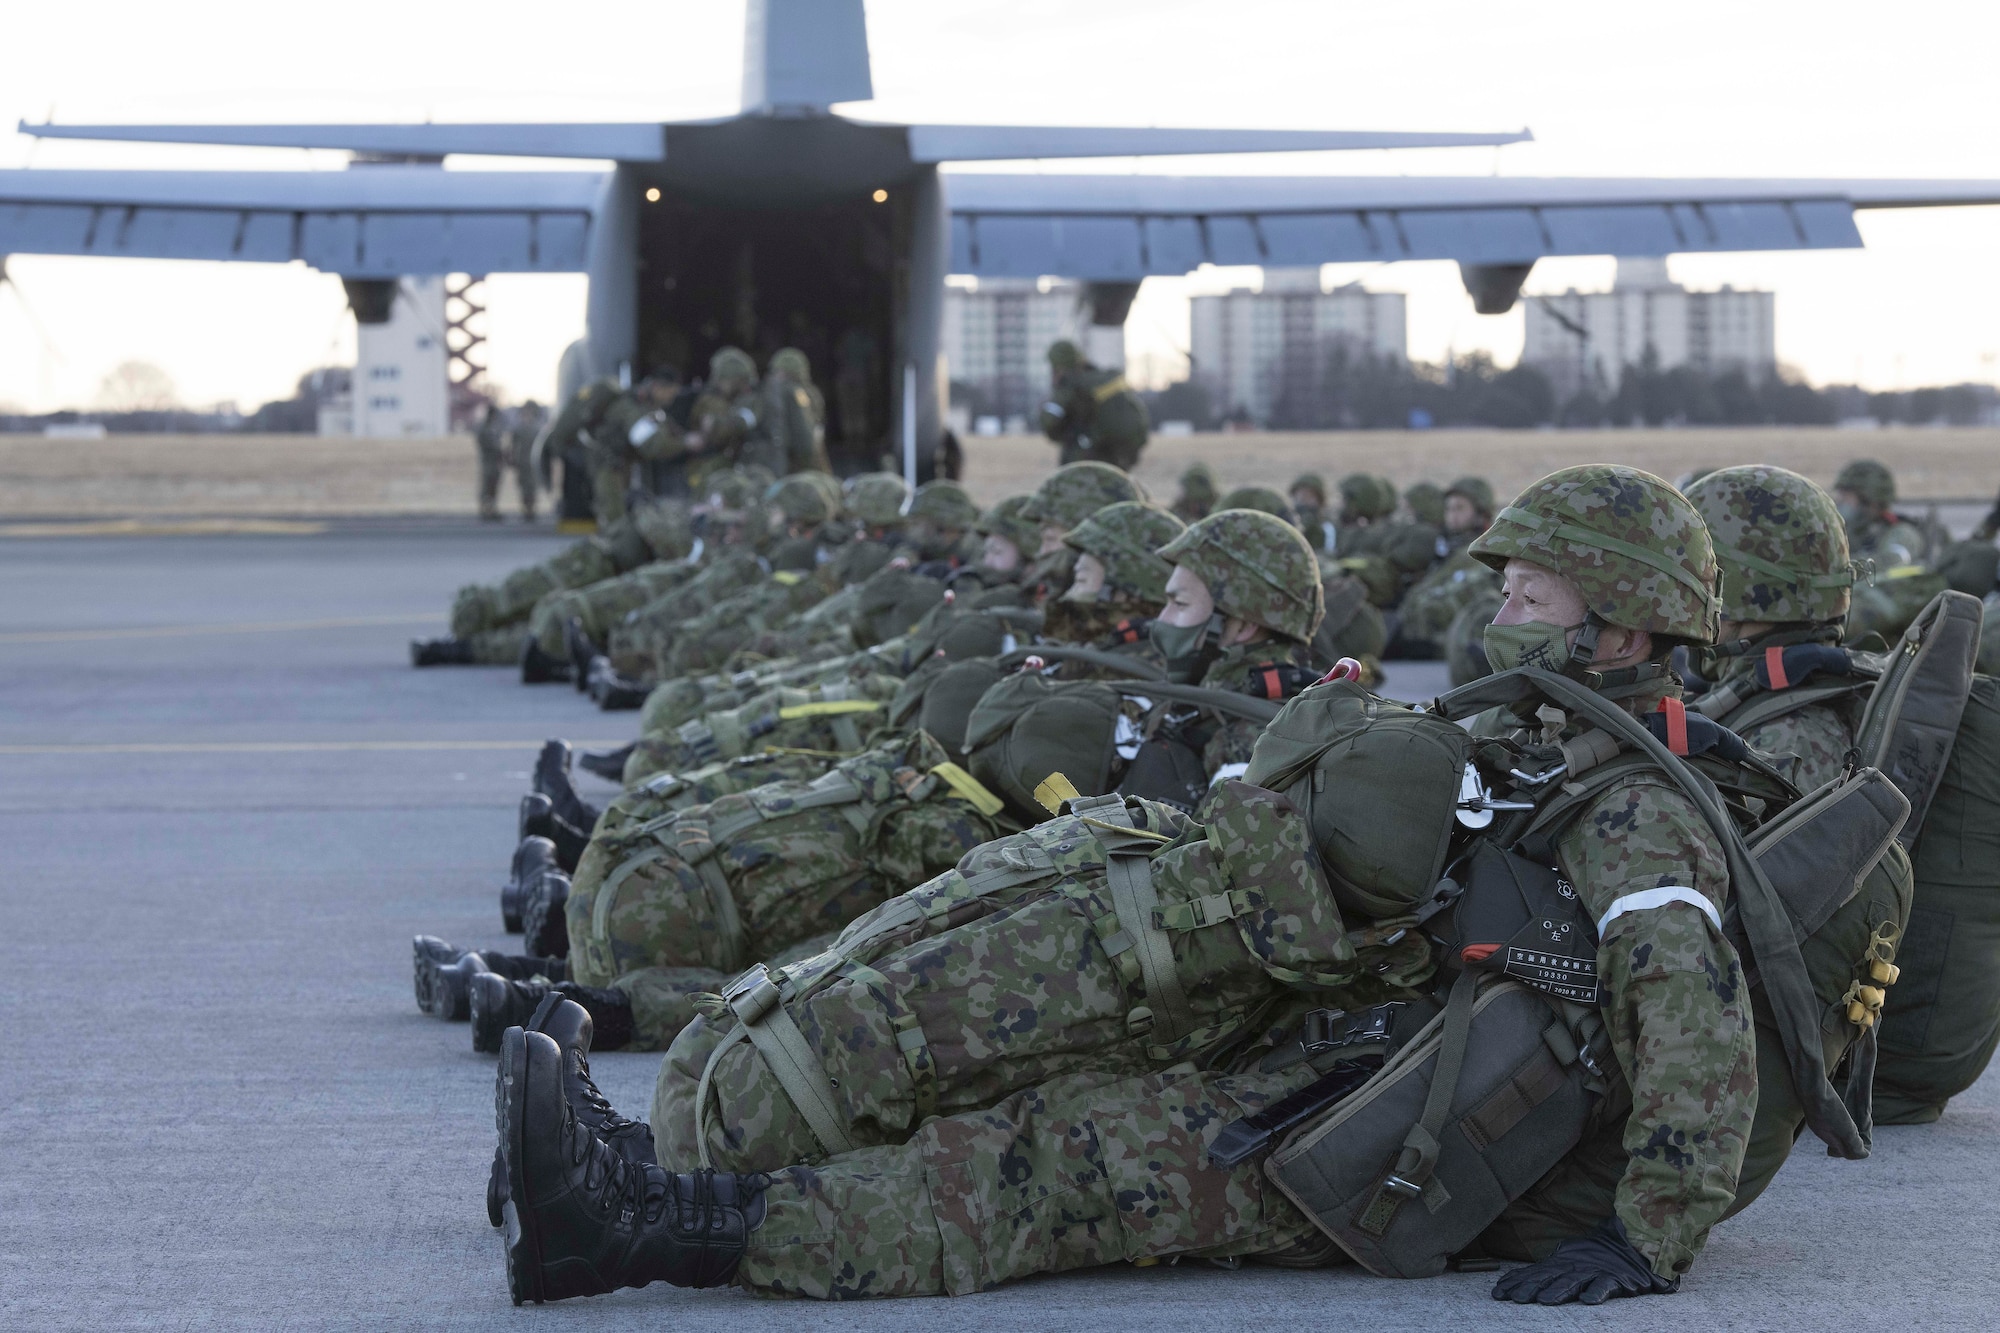 dozens of Japanese paratroopers lay on the flightline in front of a cargo plane